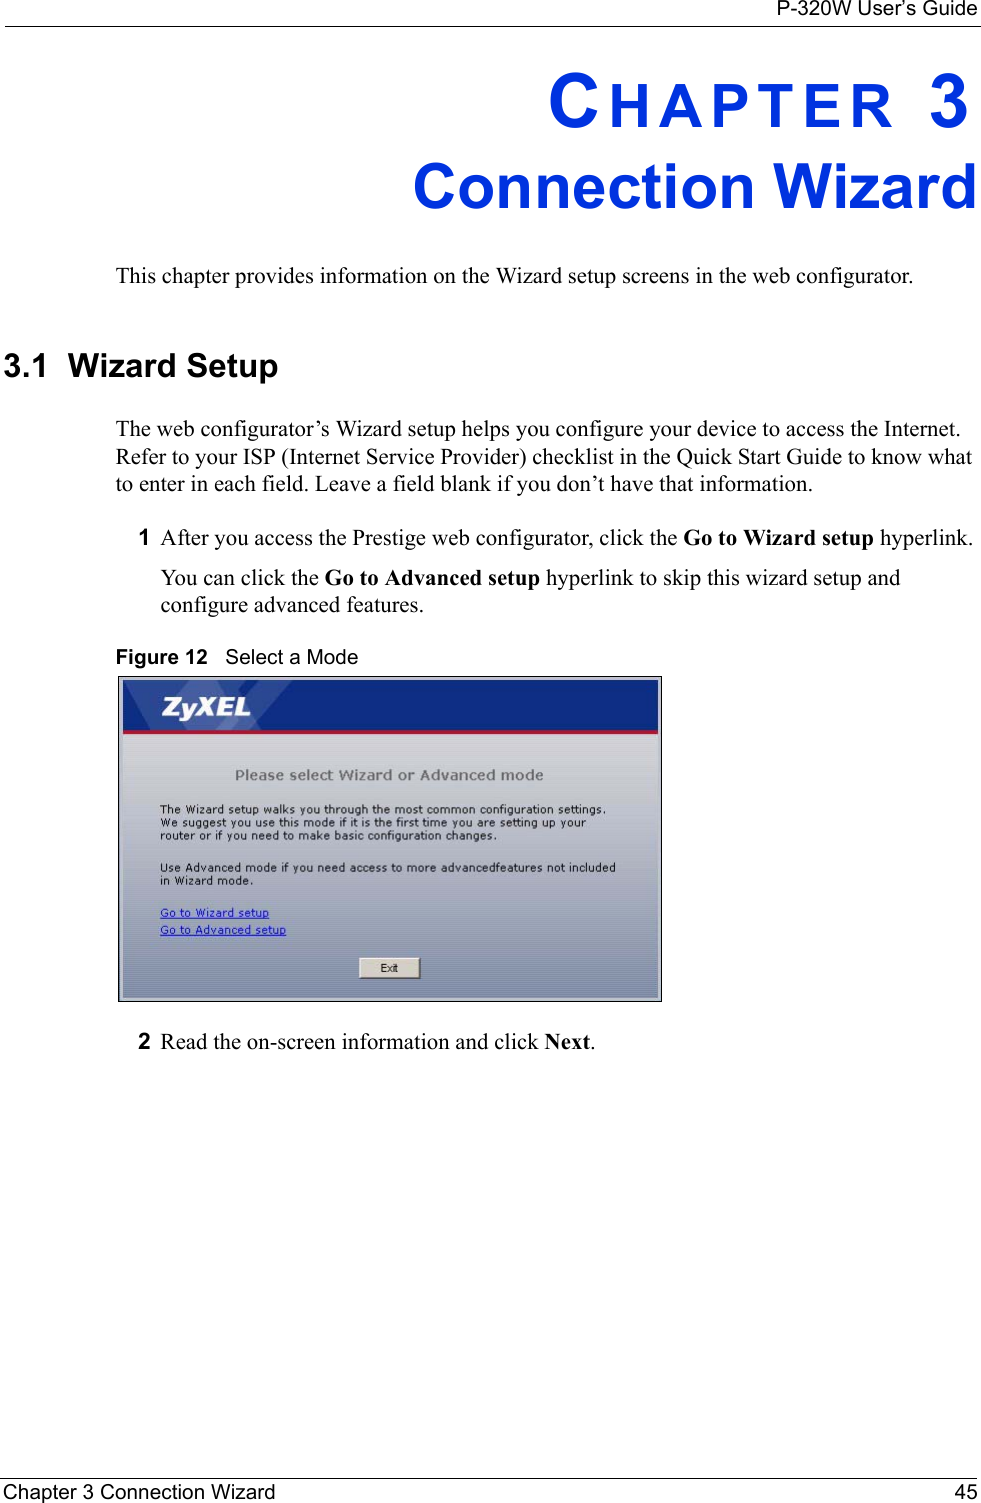 P-320W User’s GuideChapter 3 Connection Wizard 45CHAPTER 3Connection WizardThis chapter provides information on the Wizard setup screens in the web configurator.3.1  Wizard SetupThe web configurator’s Wizard setup helps you configure your device to access the Internet. Refer to your ISP (Internet Service Provider) checklist in the Quick Start Guide to know what to enter in each field. Leave a field blank if you don’t have that information.1After you access the Prestige web configurator, click the Go to Wizard setup hyperlink.You can click the Go to Advanced setup hyperlink to skip this wizard setup and configure advanced features.Figure 12   Select a Mode2Read the on-screen information and click Next.